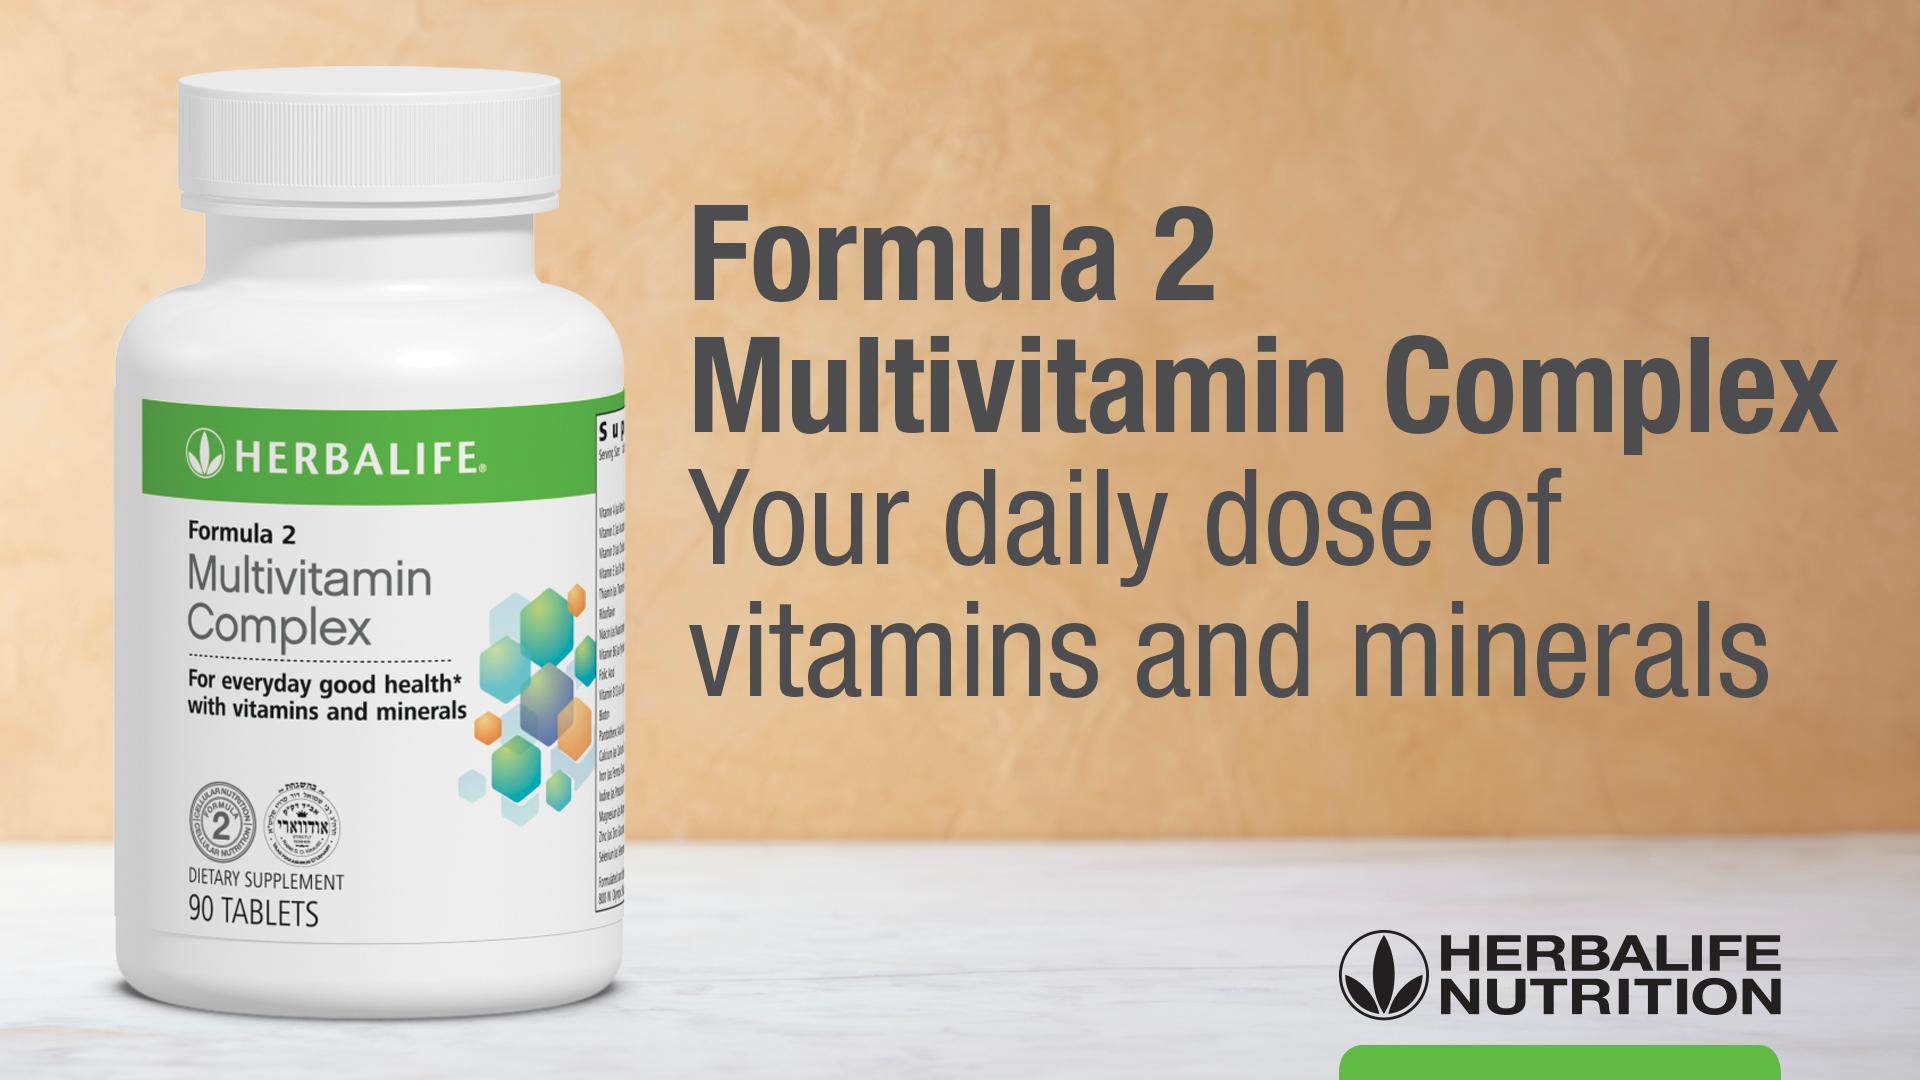 Formula 2 Complex: Know the Products Feature - Herbalife Product Videos/usen